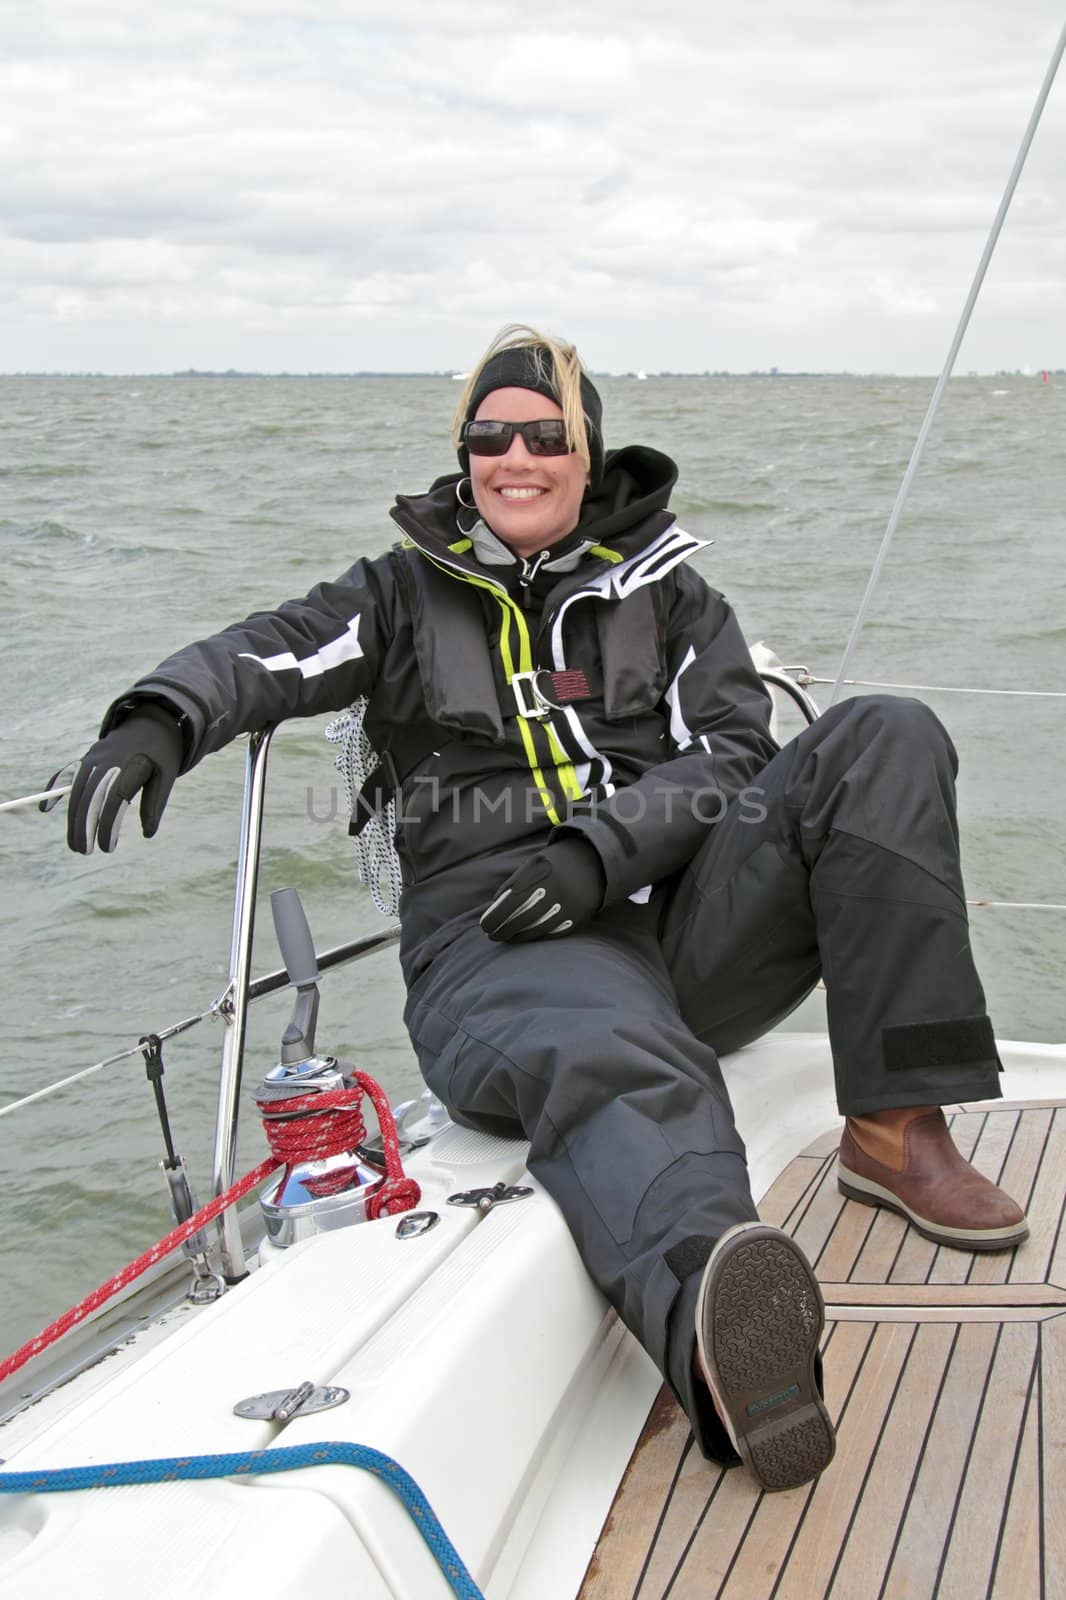 Relaxing during sailing on the IJsselmeer in the Netherlands